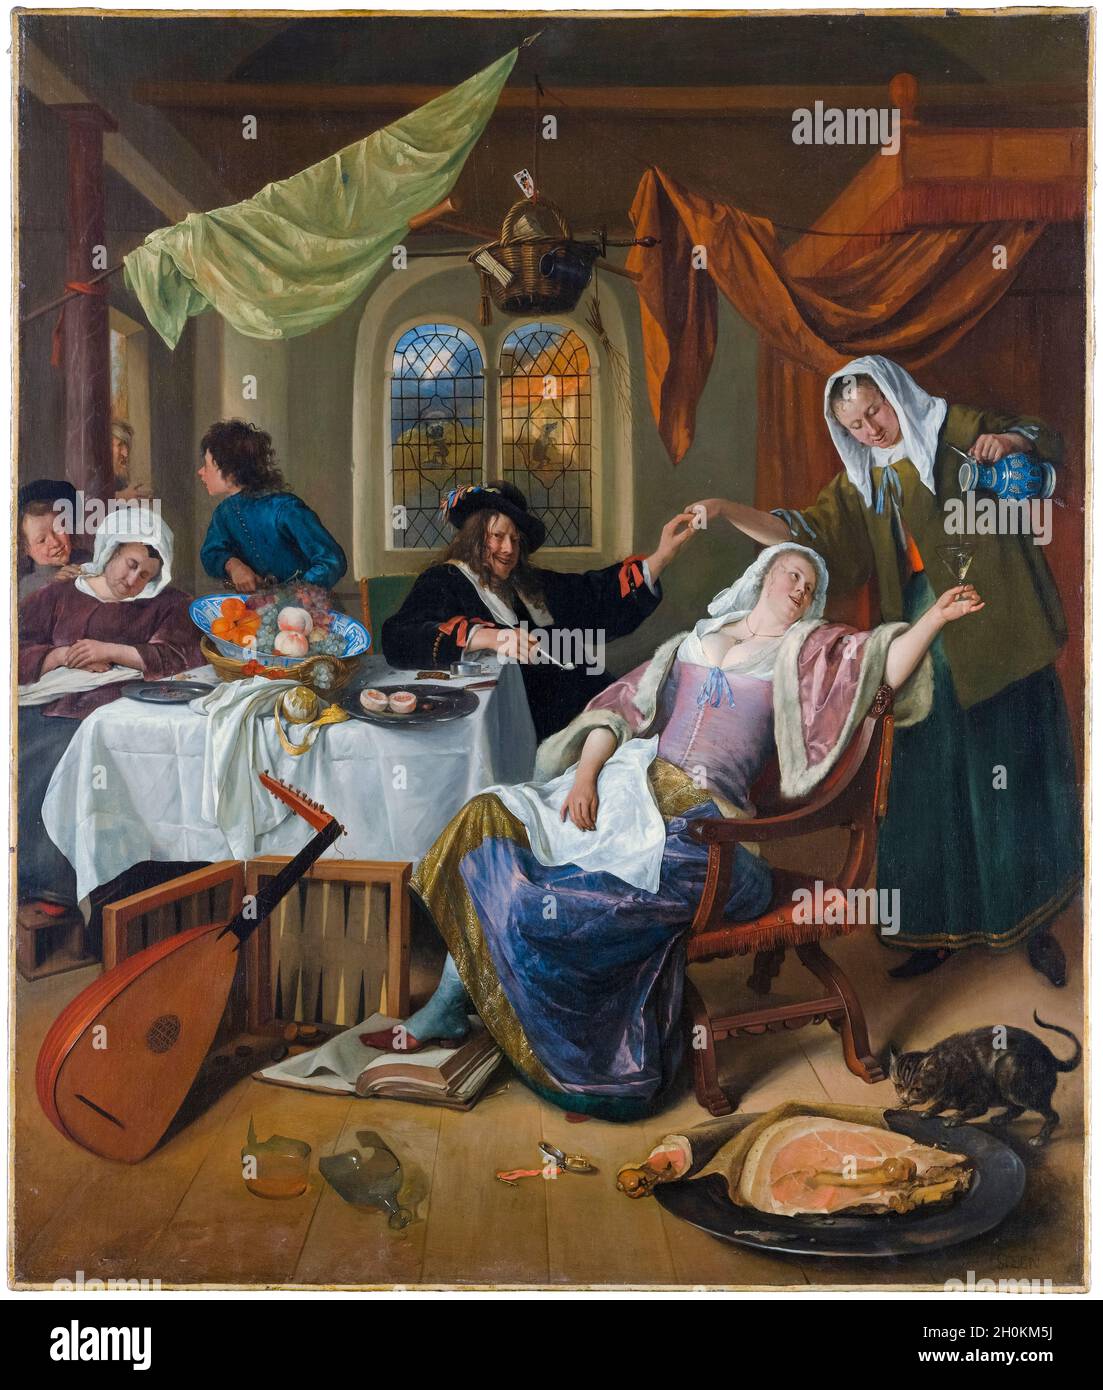 Jan Steen, painting, The Dissolute Household, 1663-1664 Stock Photo